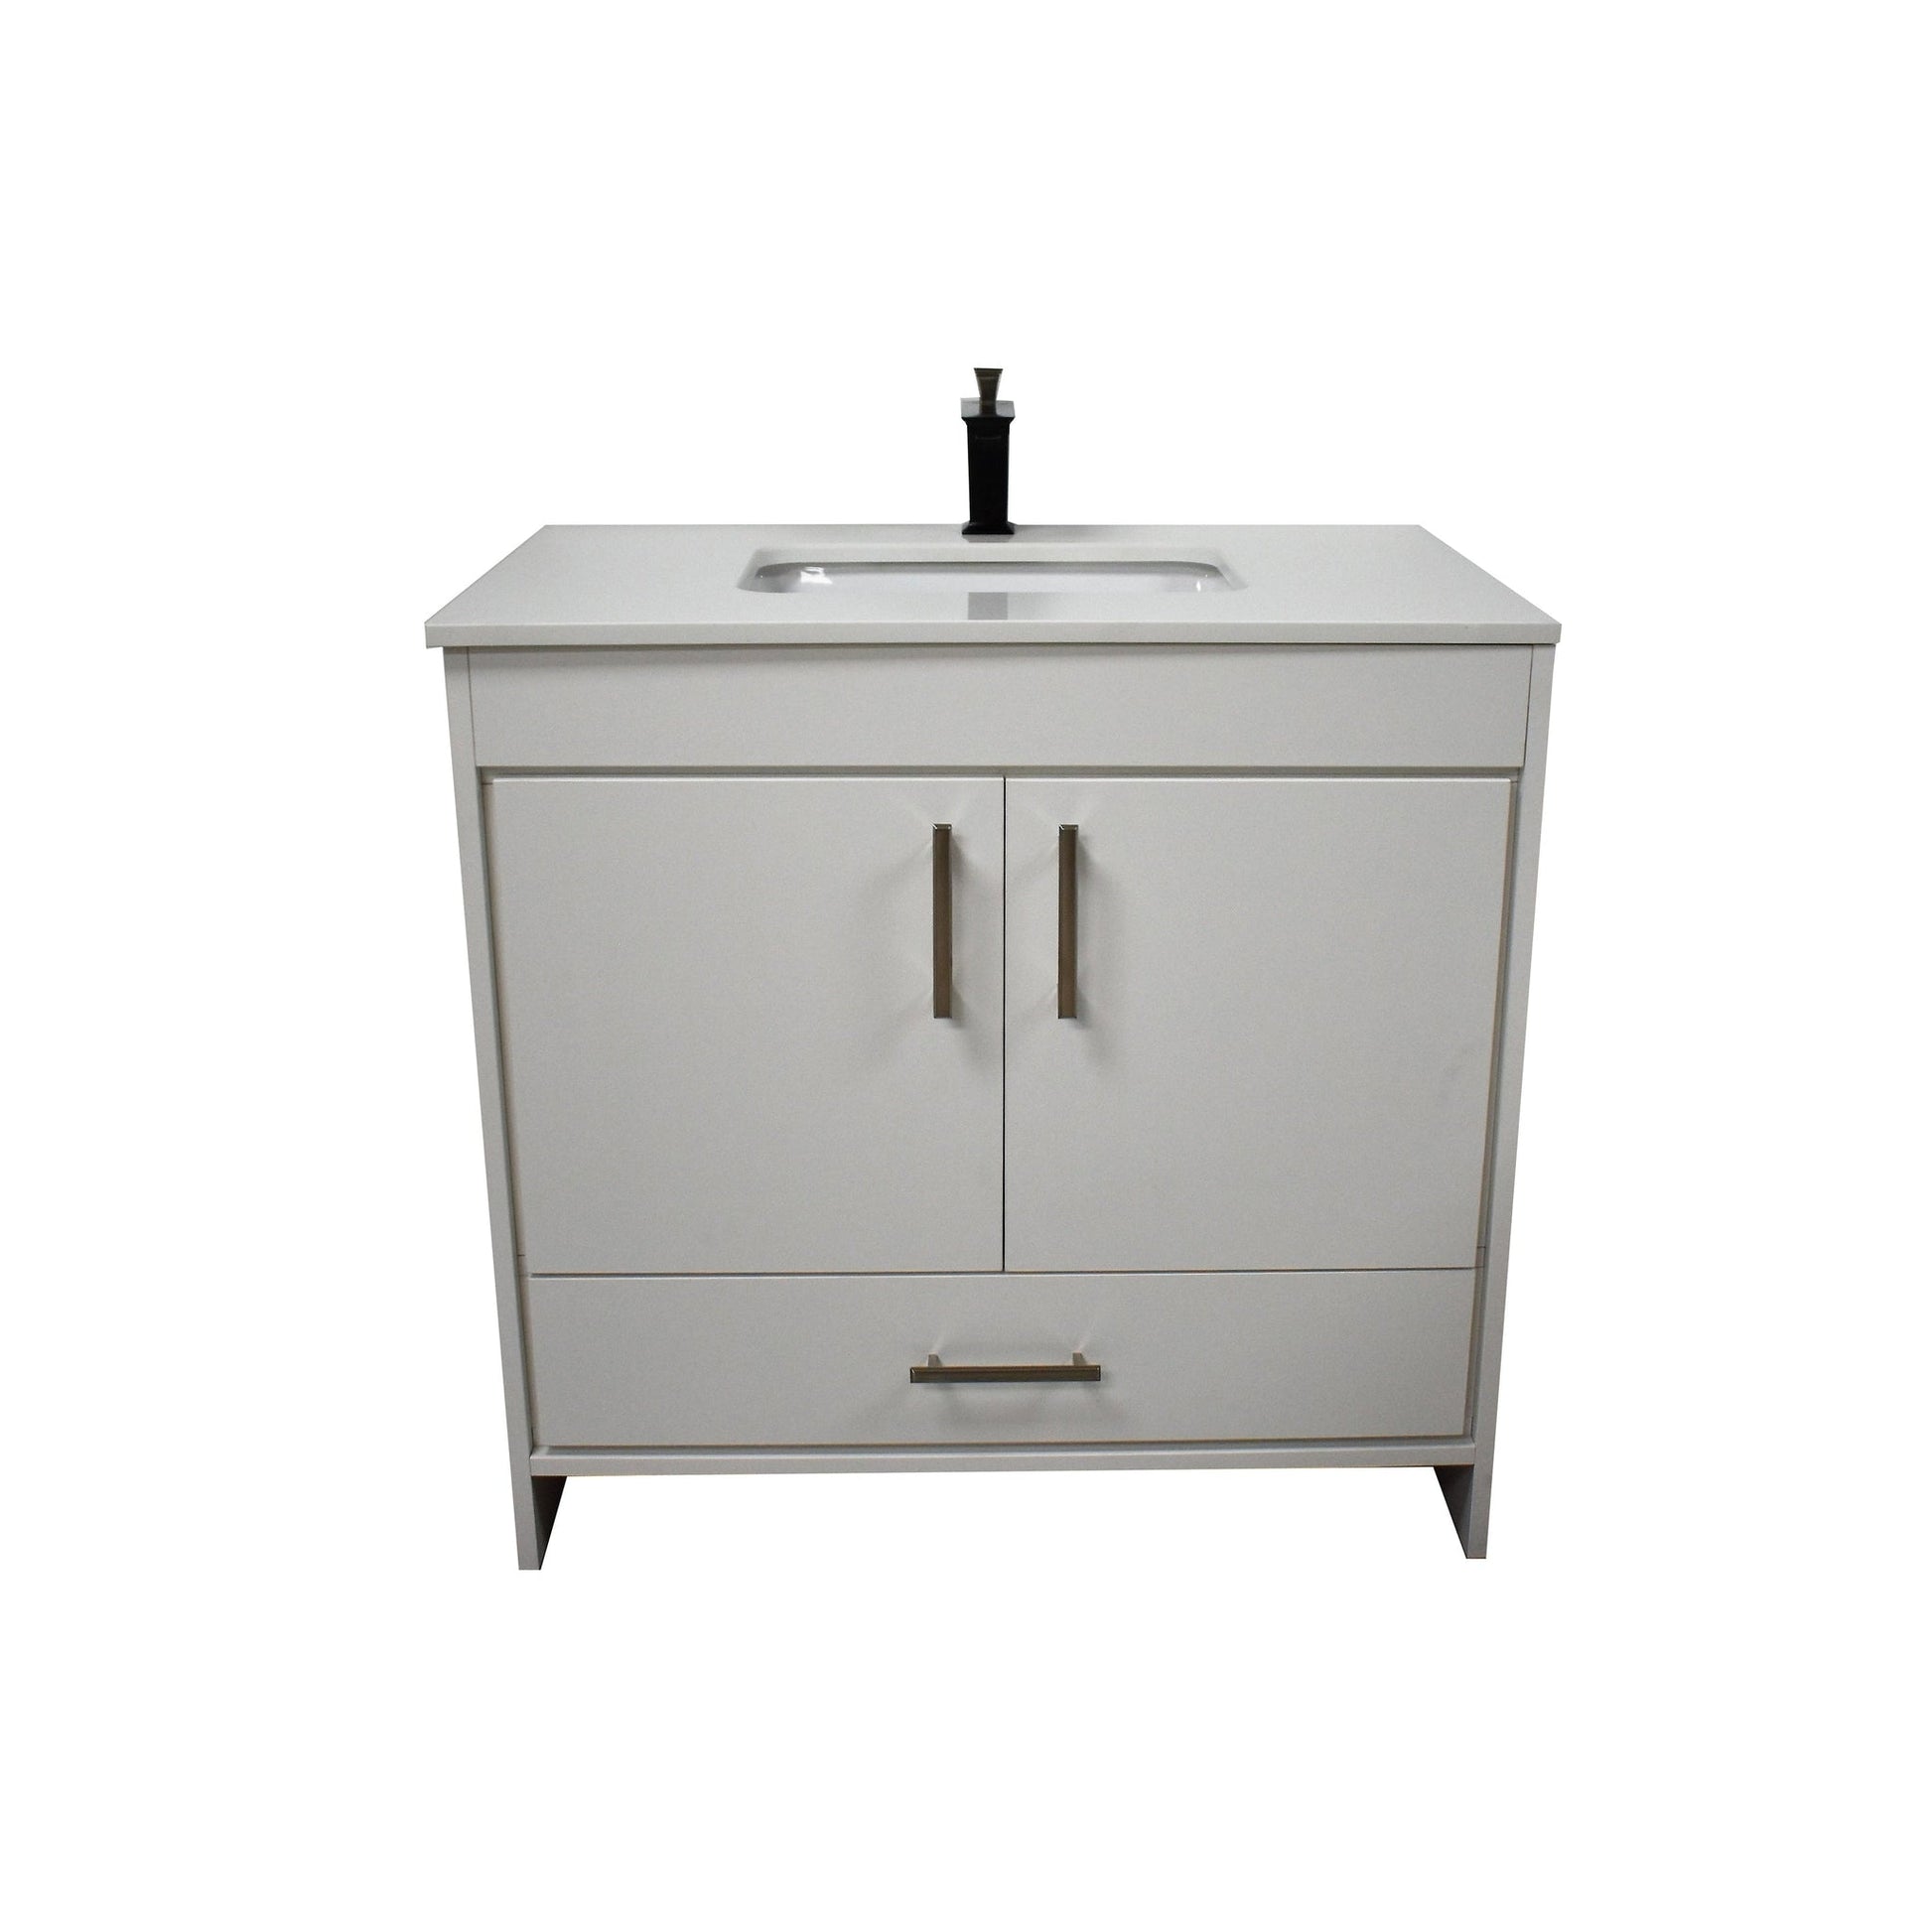 Volpa USA Capri 36" x 22" White Freestanding Modern Bathroom Vanity With Preinstalled Undermount Sink And White Microstone Top With Brushed Nickel Edge Handles